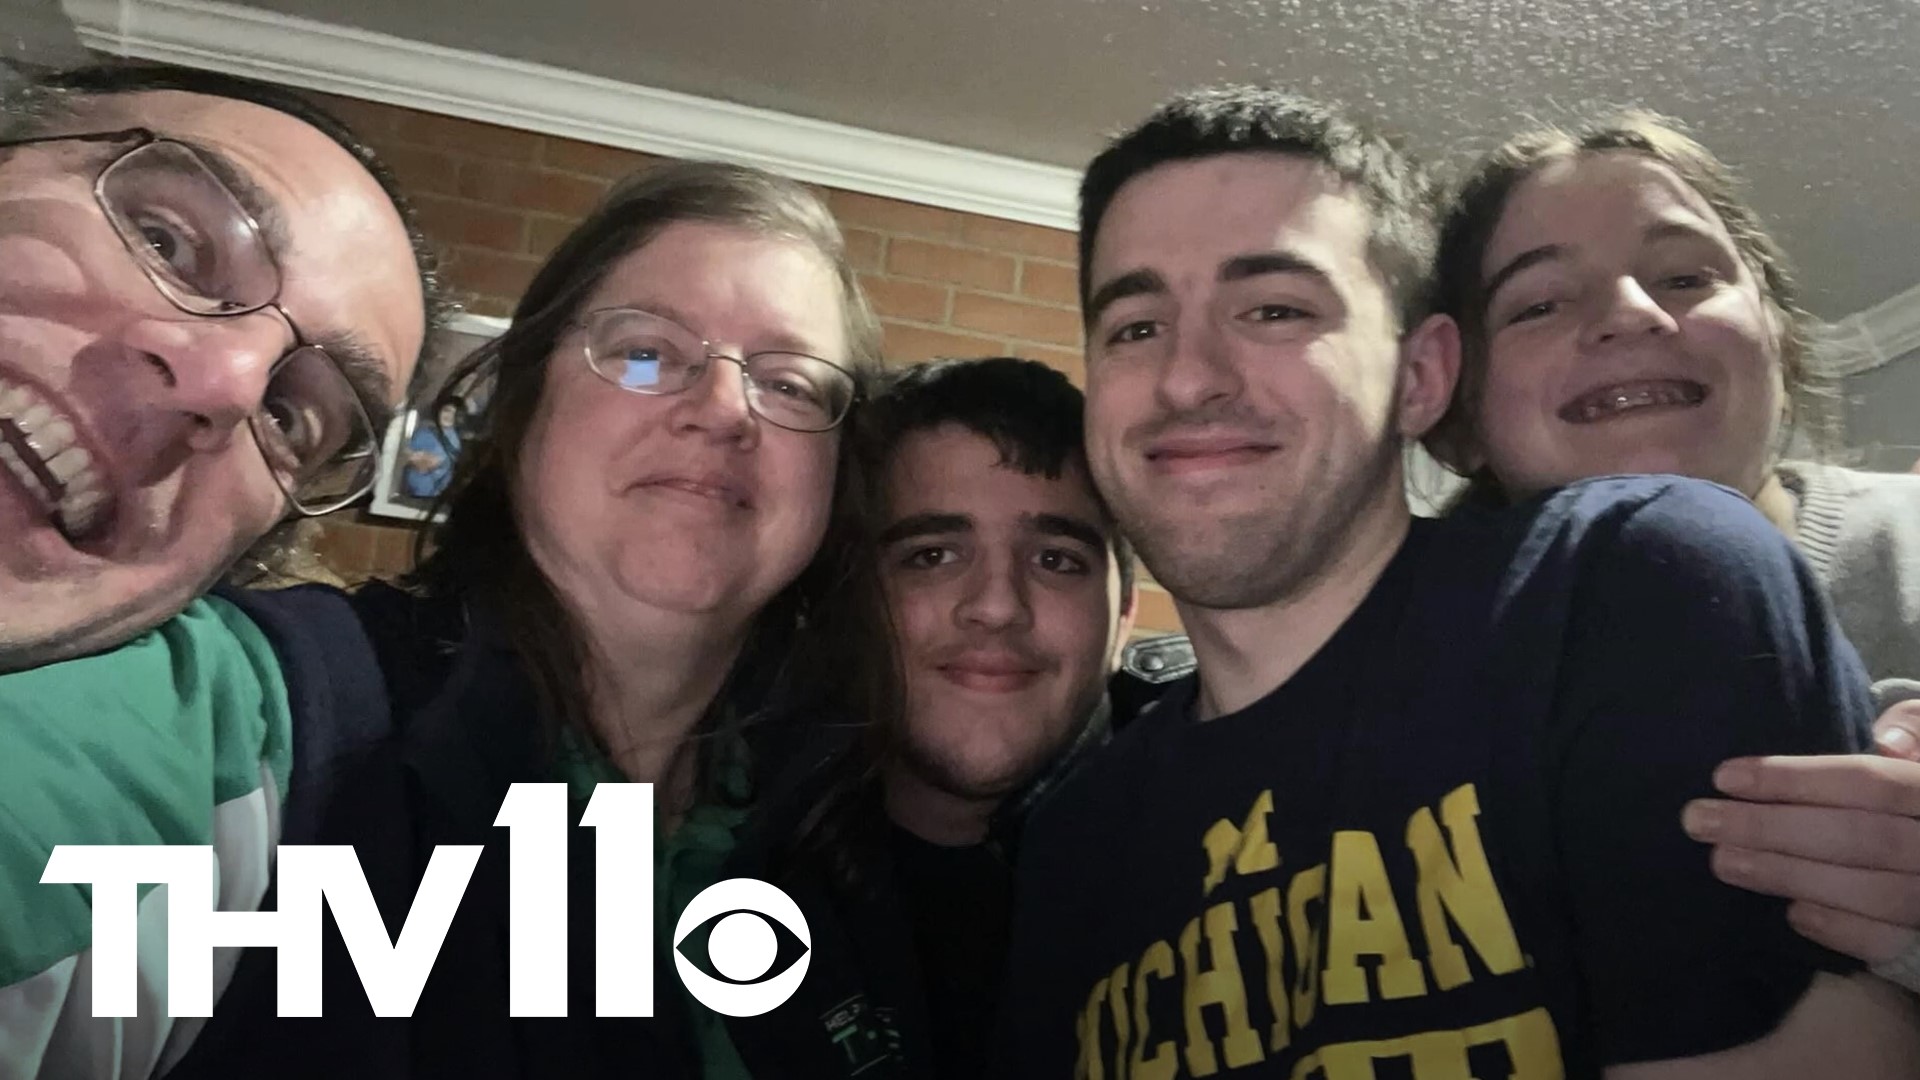 An Arkansas family was tragically killed, and two others were injured in a Michigan house explosion that could be heard miles away.